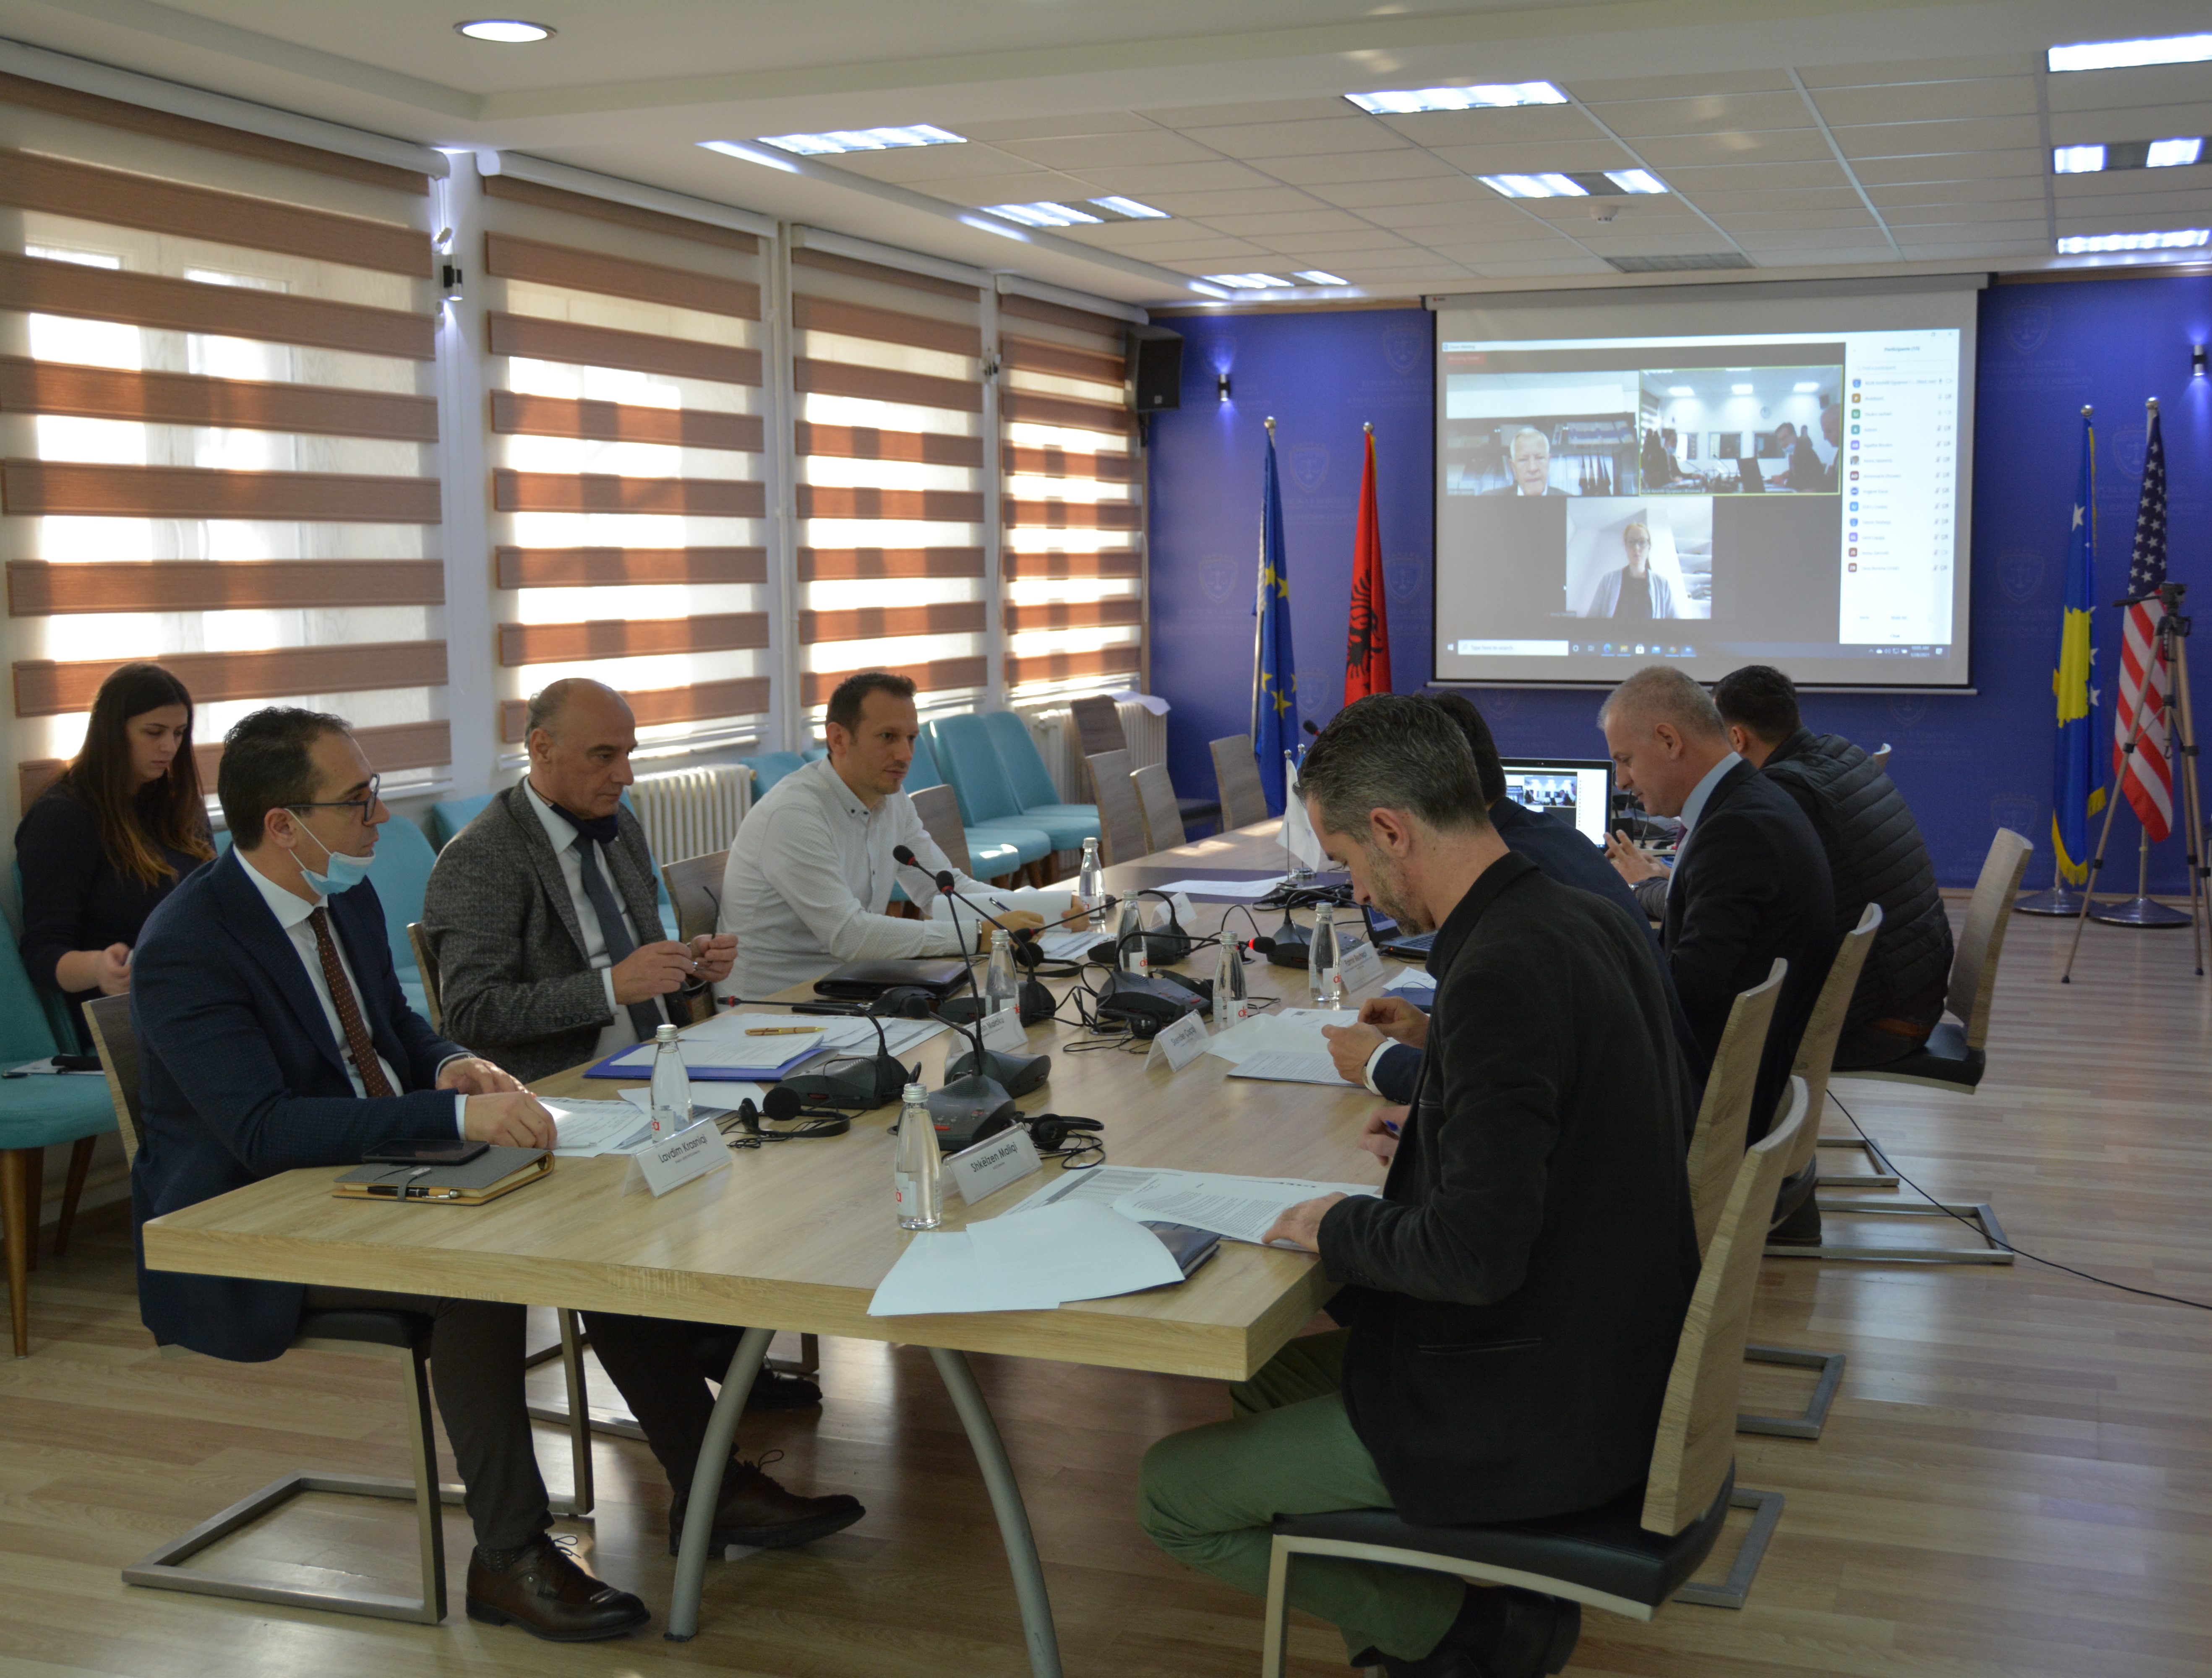 The next meeting of the Steering Board of the ICT / CMIS Project was held